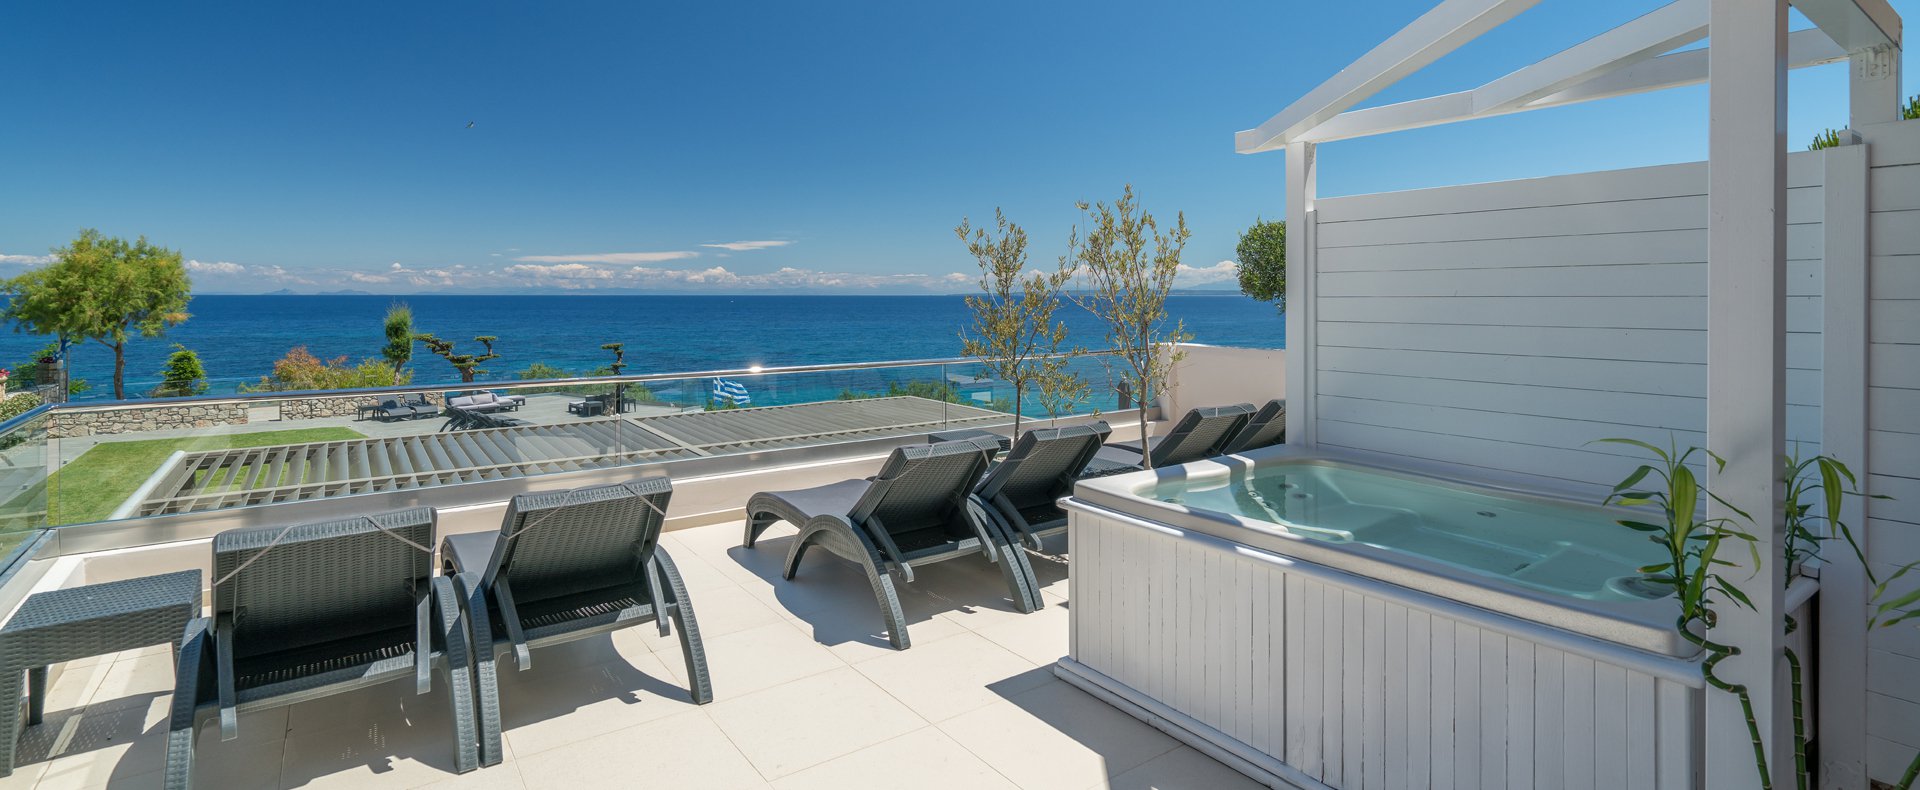 Veranda with sunbeds facing the Ionian Sea at Kymothoe Elite Suites in Zakynthos